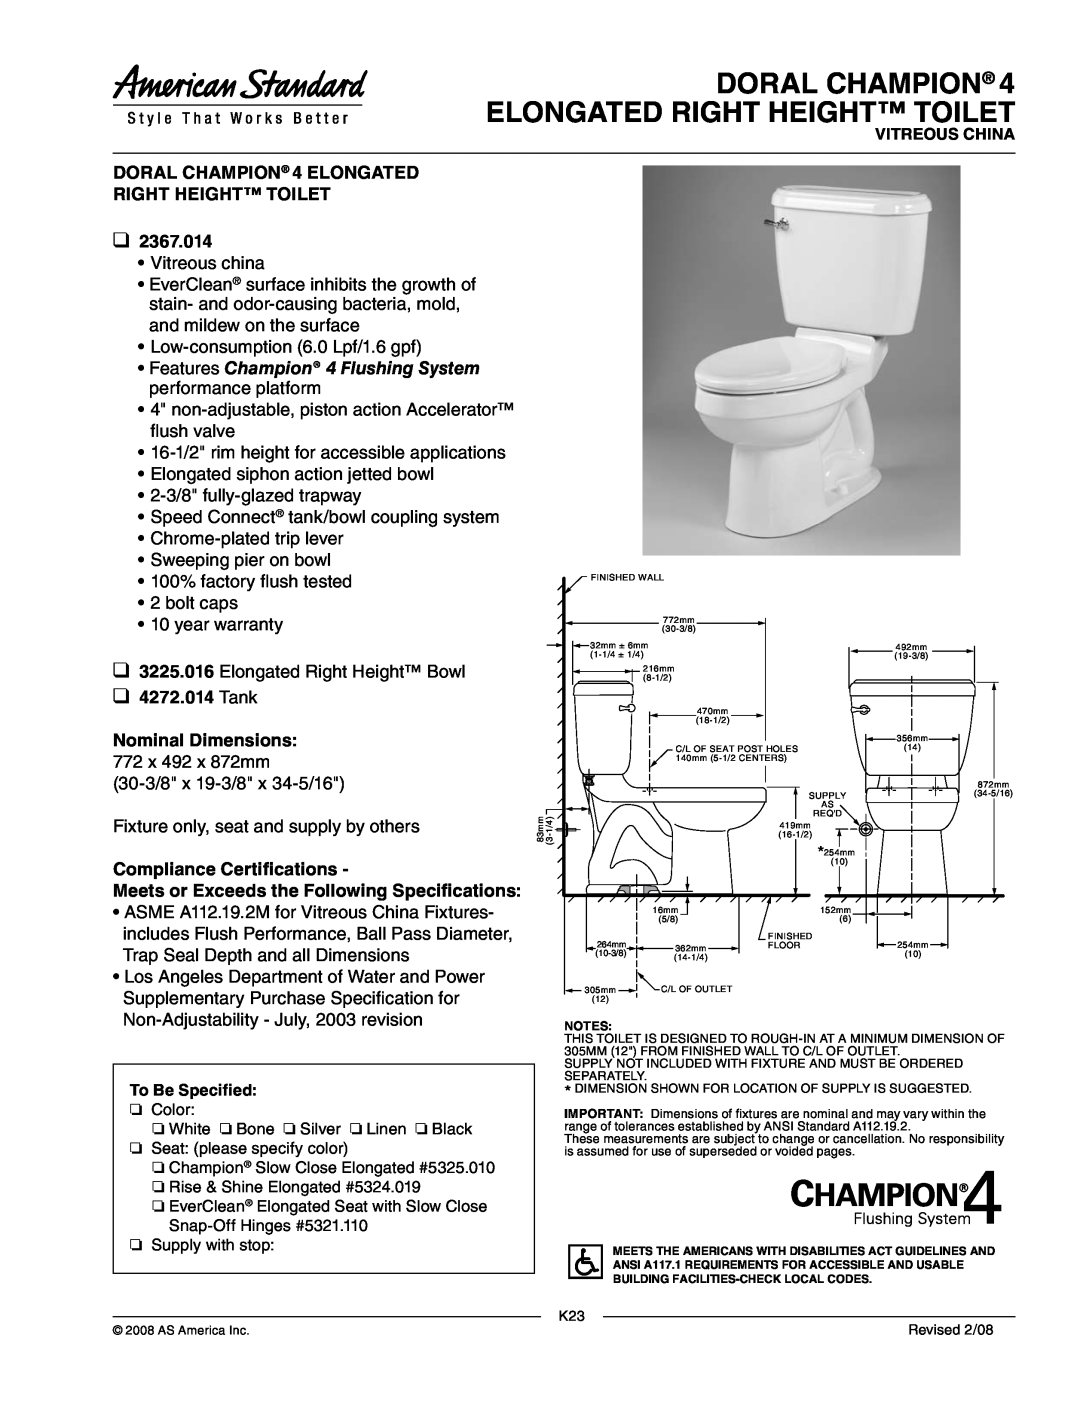 American Standard 2367.014 dimensions Doral Champion Elongated Right Height Toilet, Tank Nominal Dimensions 